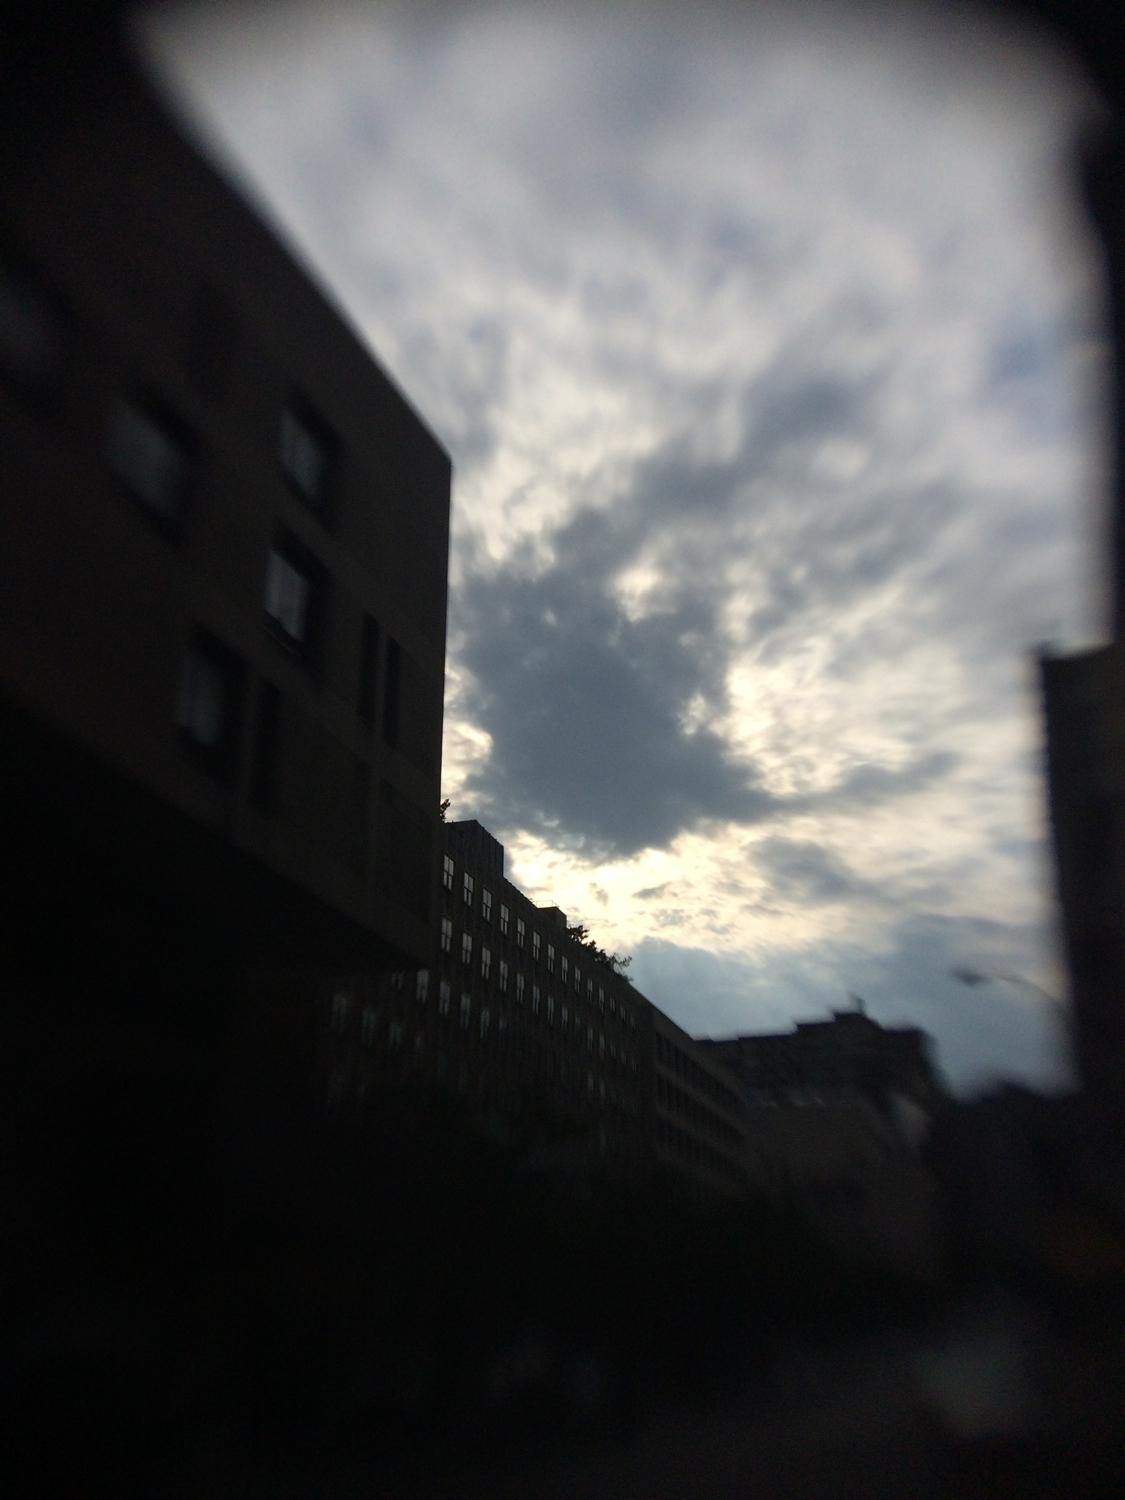 blurs arent defects but the charm in lensbabys new mobile lens kit lensbaby creative sample 1